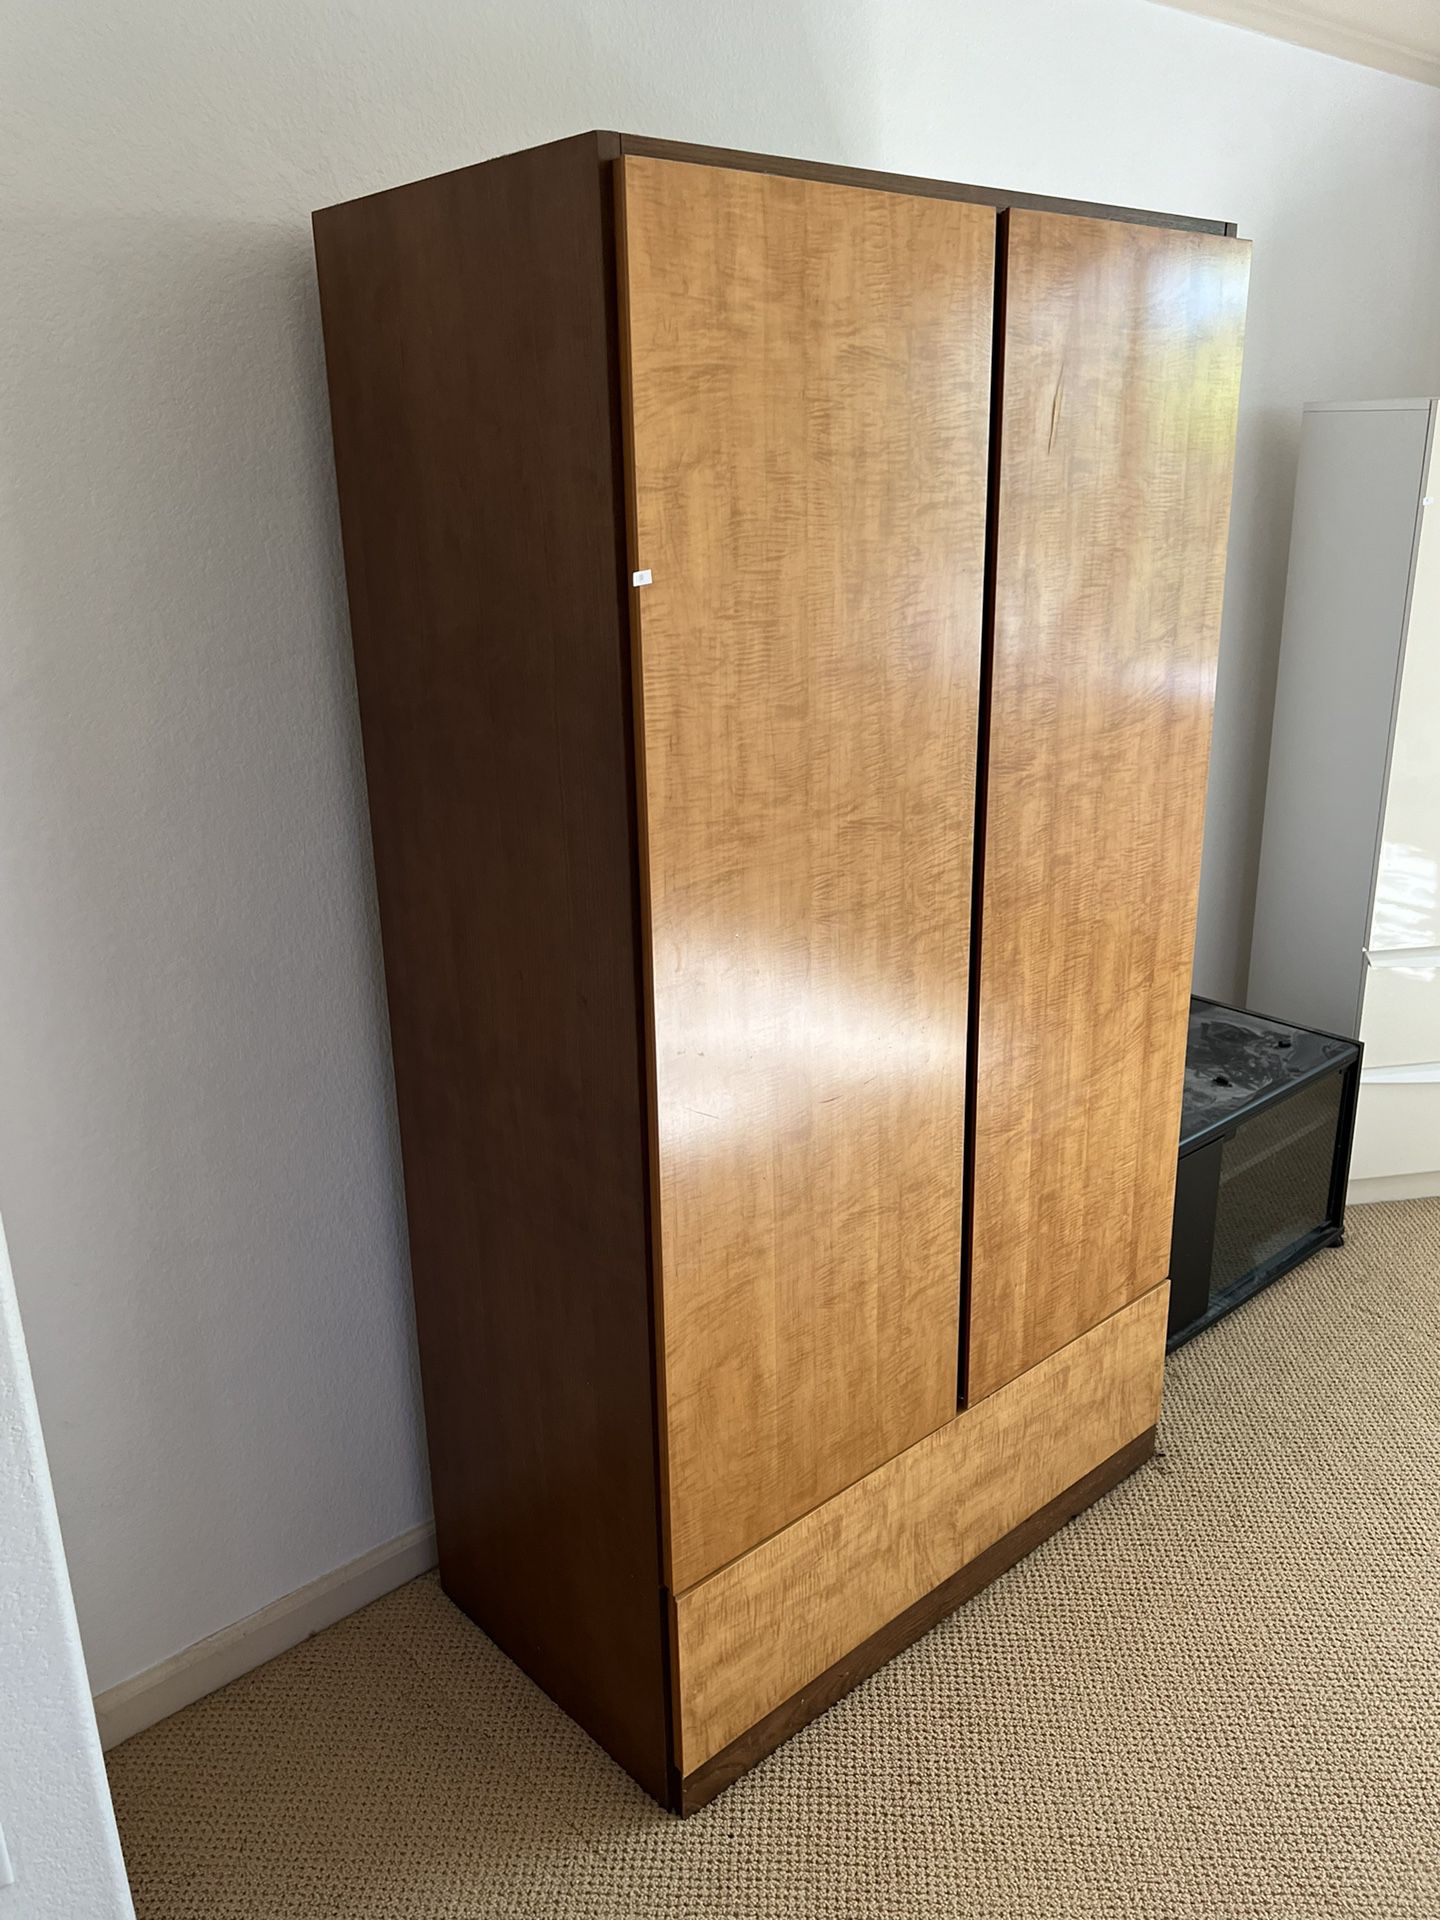 Dressers and Armoire For Sale. Great Condition.